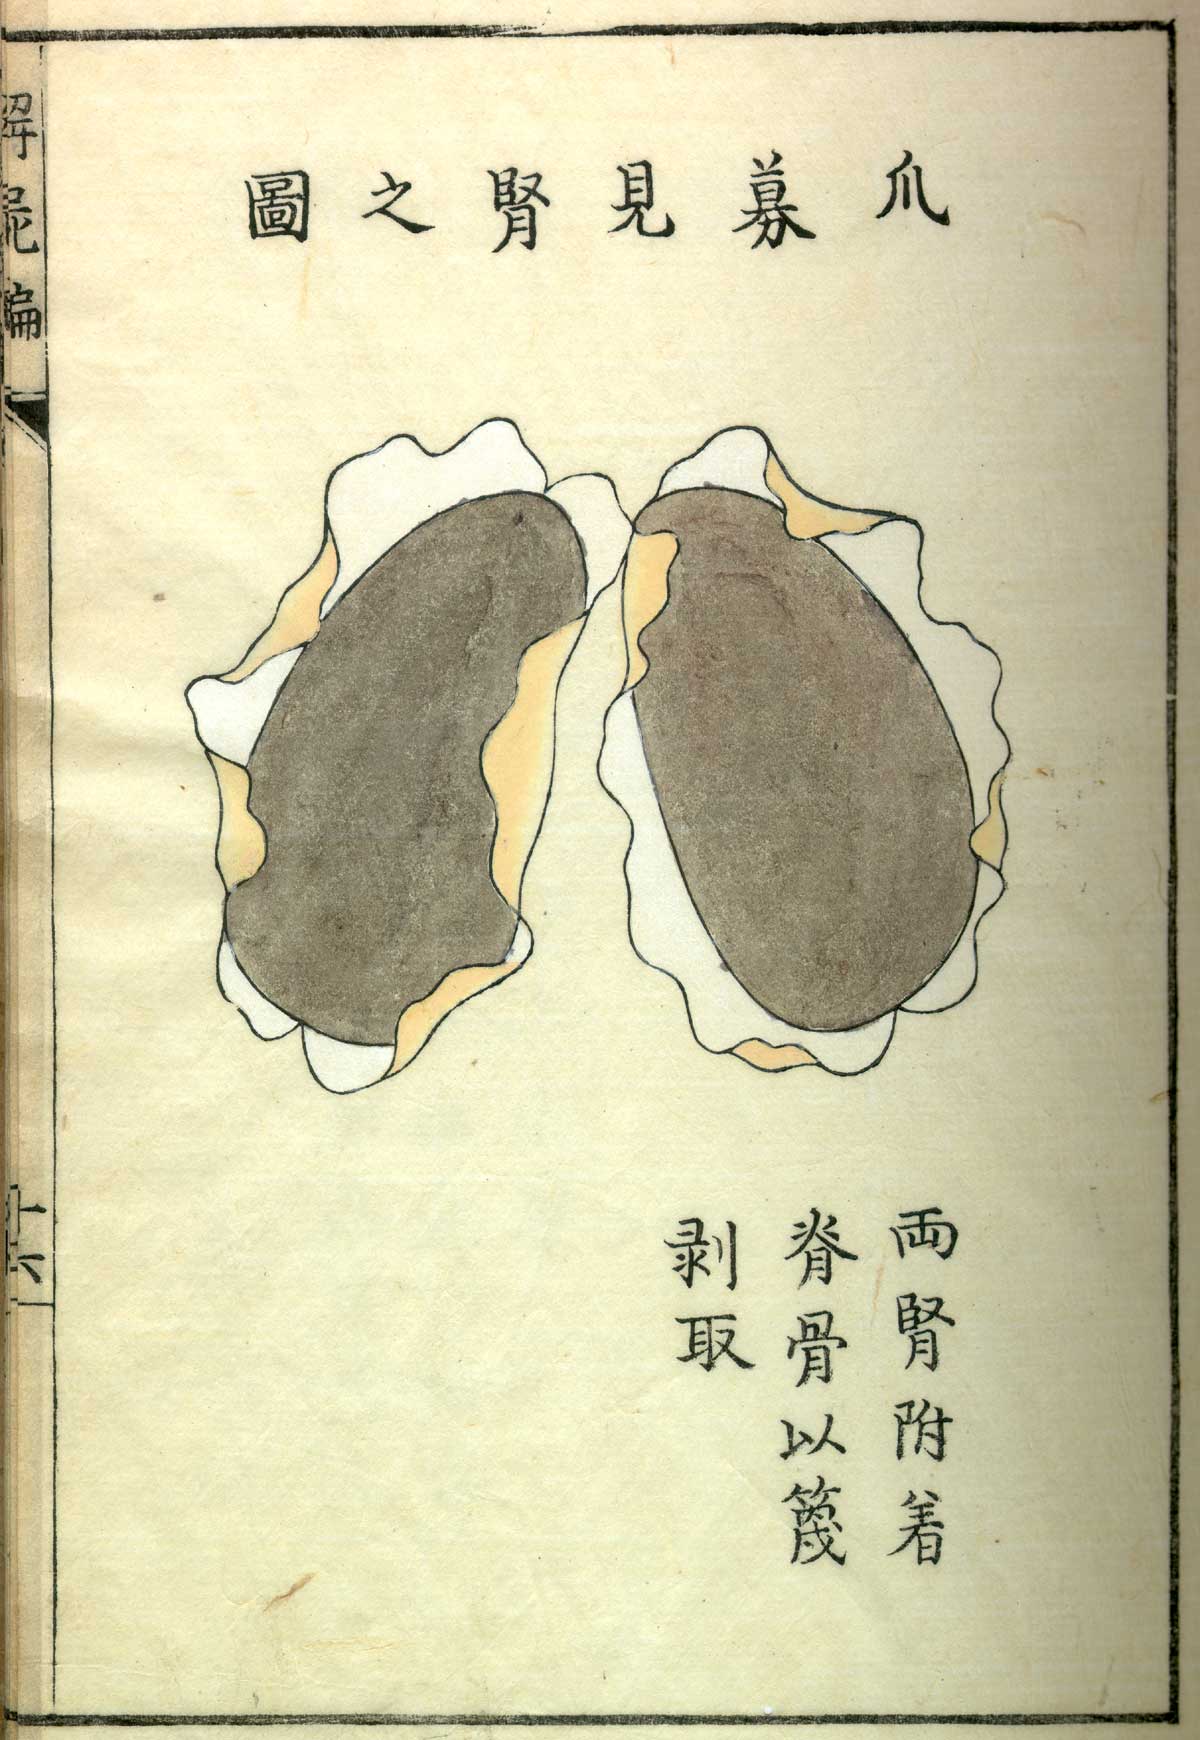 Hand colored woodcut of the kidneys with Japanese text above and below describing some of the structures, from Shinnin Kawaguchi's Kaishi hen, NLM Call no.: WZ 260 K21k 1772.